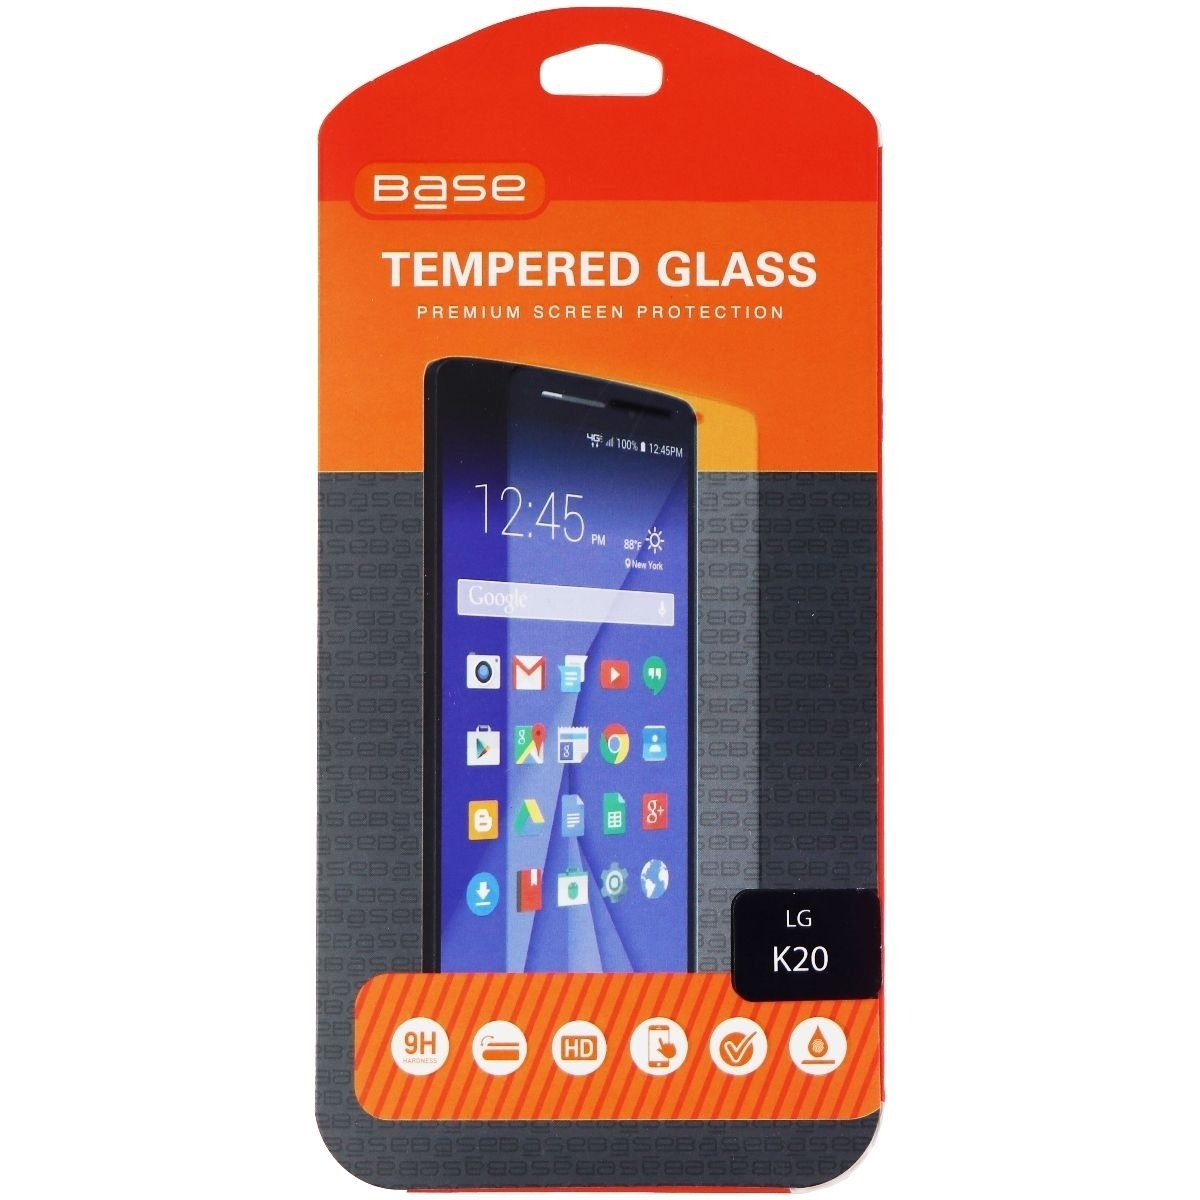 Base Tempered Glass Premium Screen Protector For LG K20 - Clear